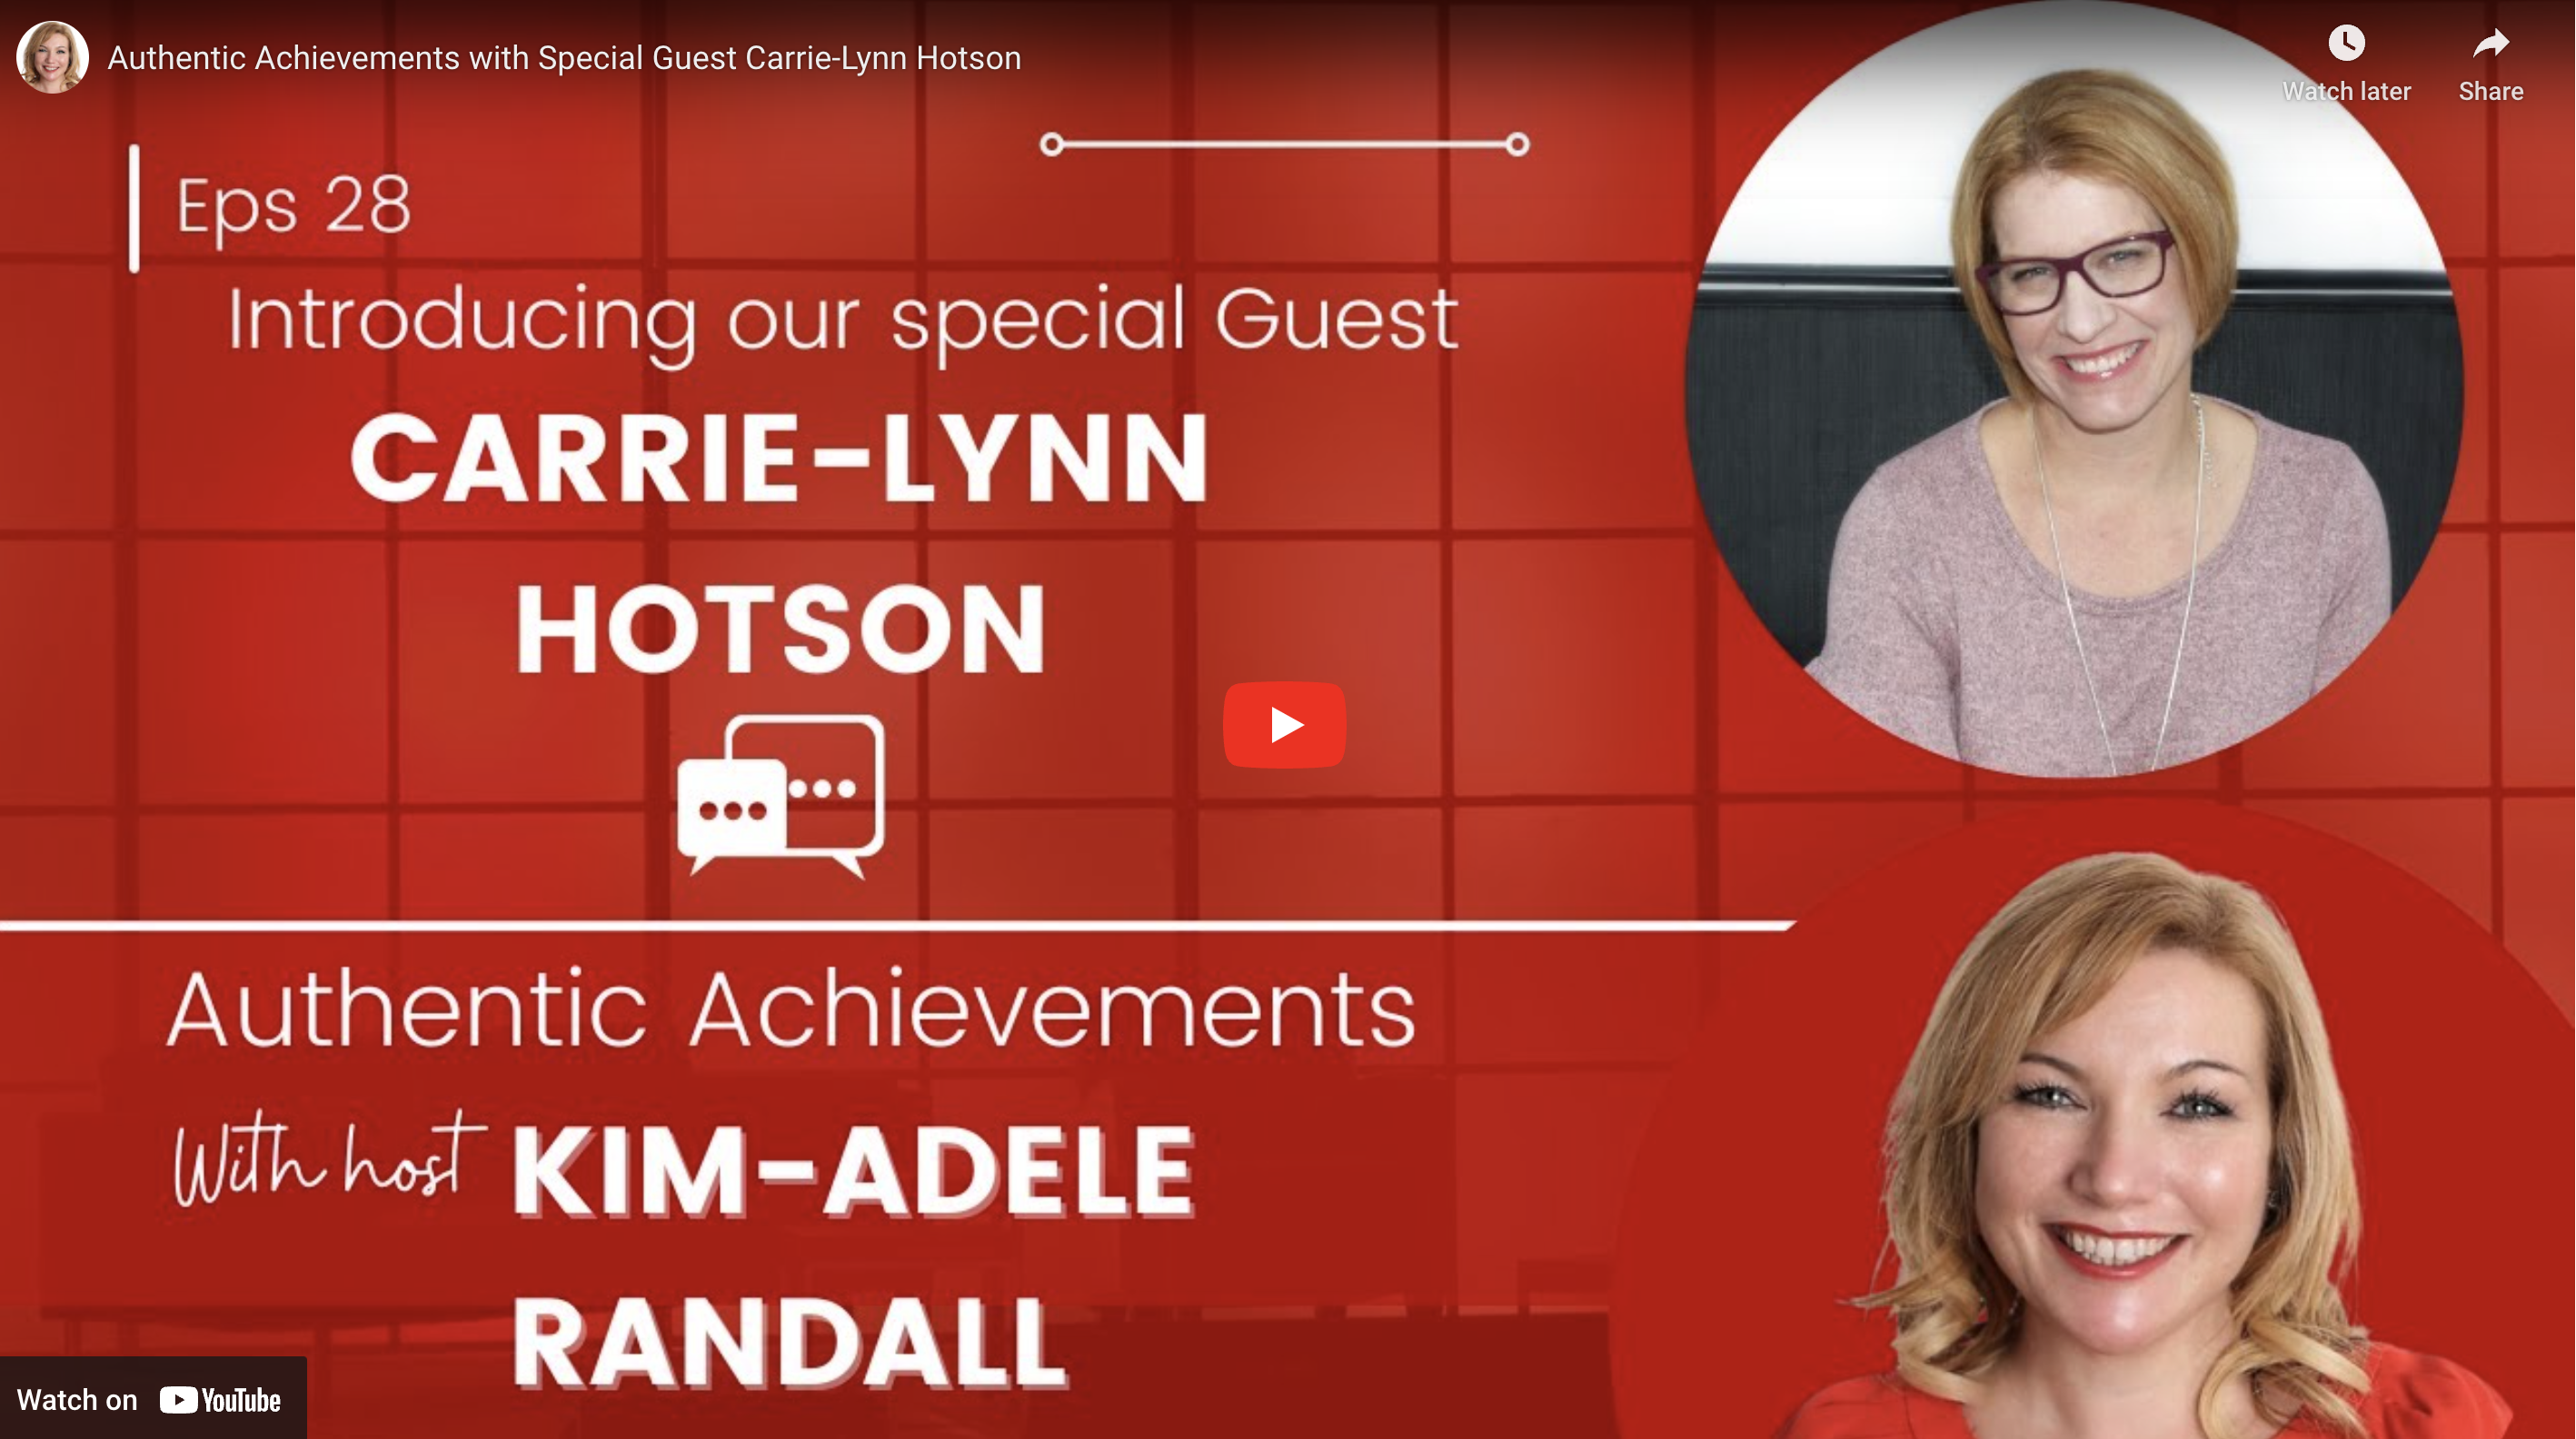 Authentic Achievements with special guest Carrie-Lynn Hotson